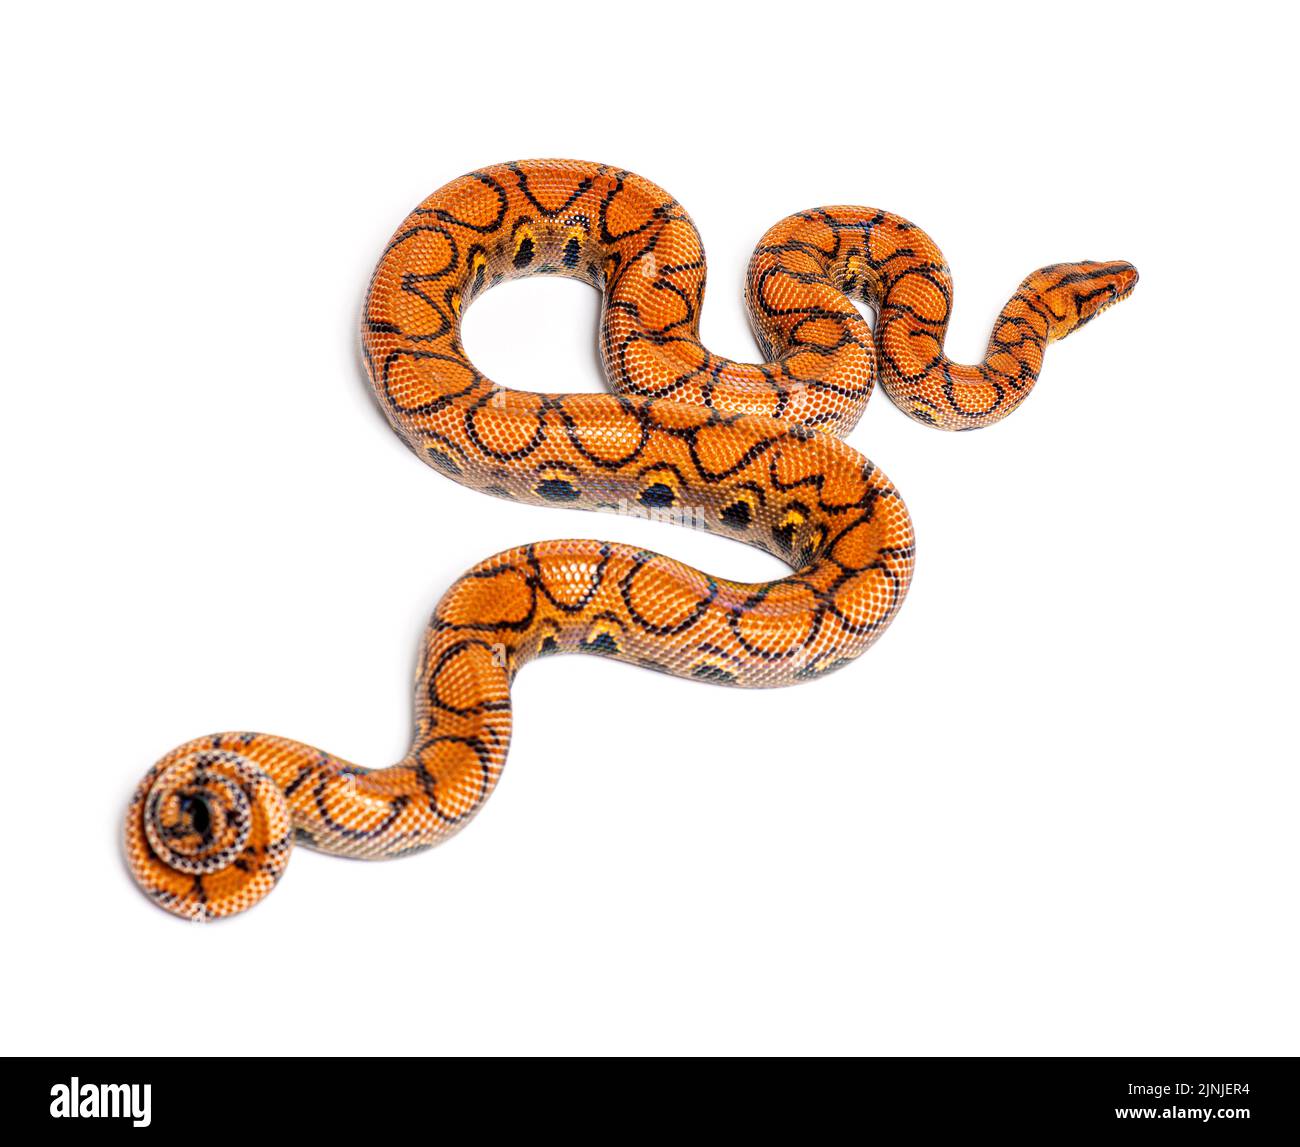 Back view of a Rainbow boa, Epicrates cenchria, isolated on white Stock Photo